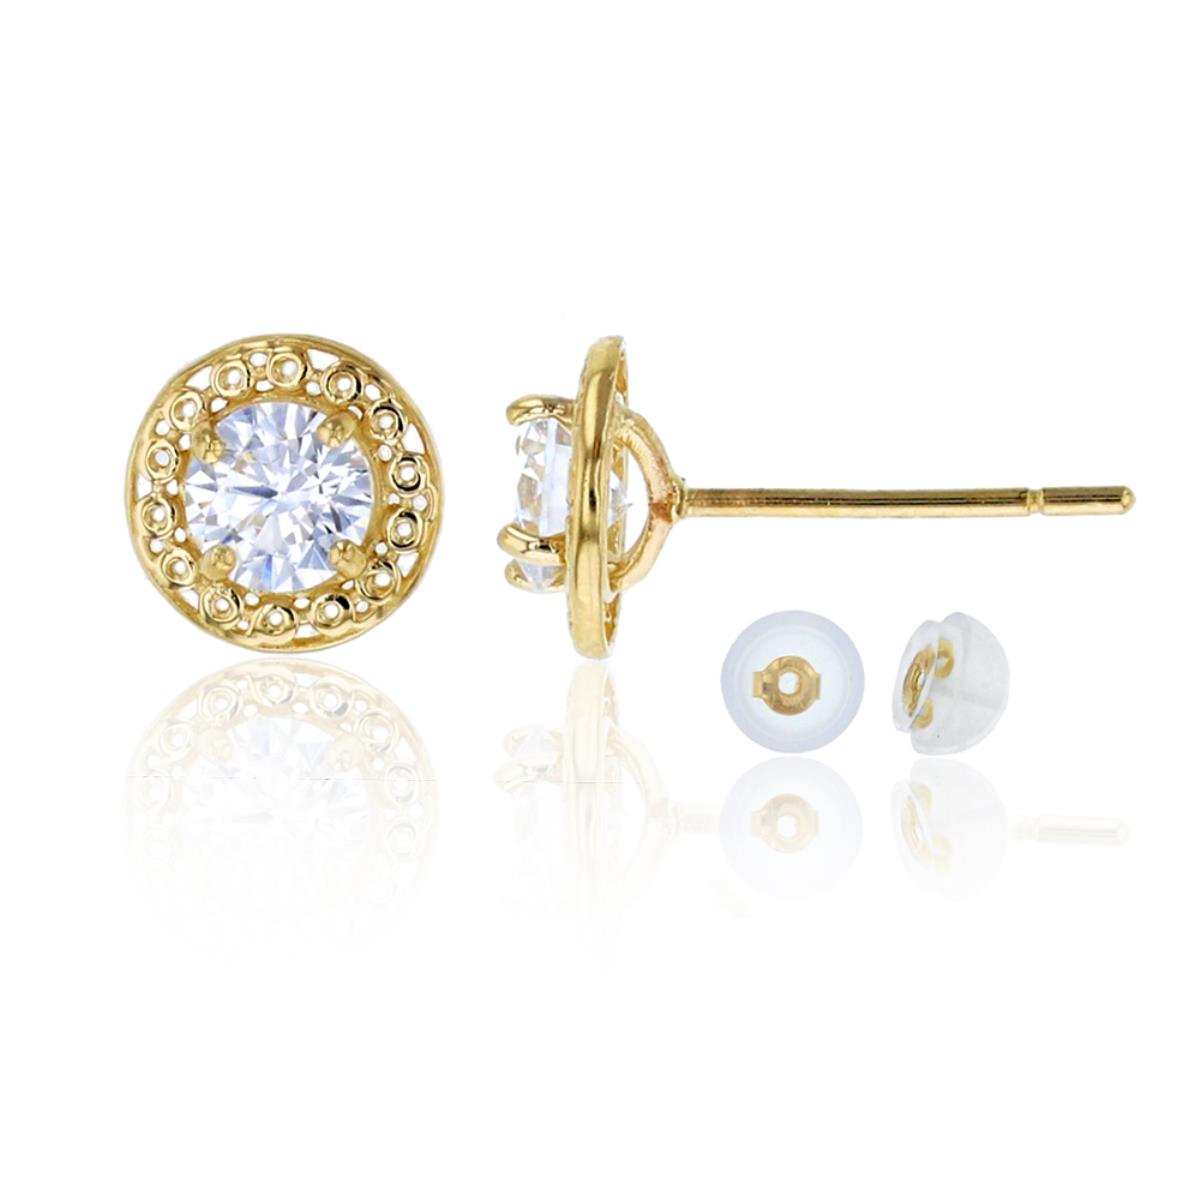 14K Yellow Gold 4mm Round Cut CZ Filigree Stud Earring & 14K Silicone Back